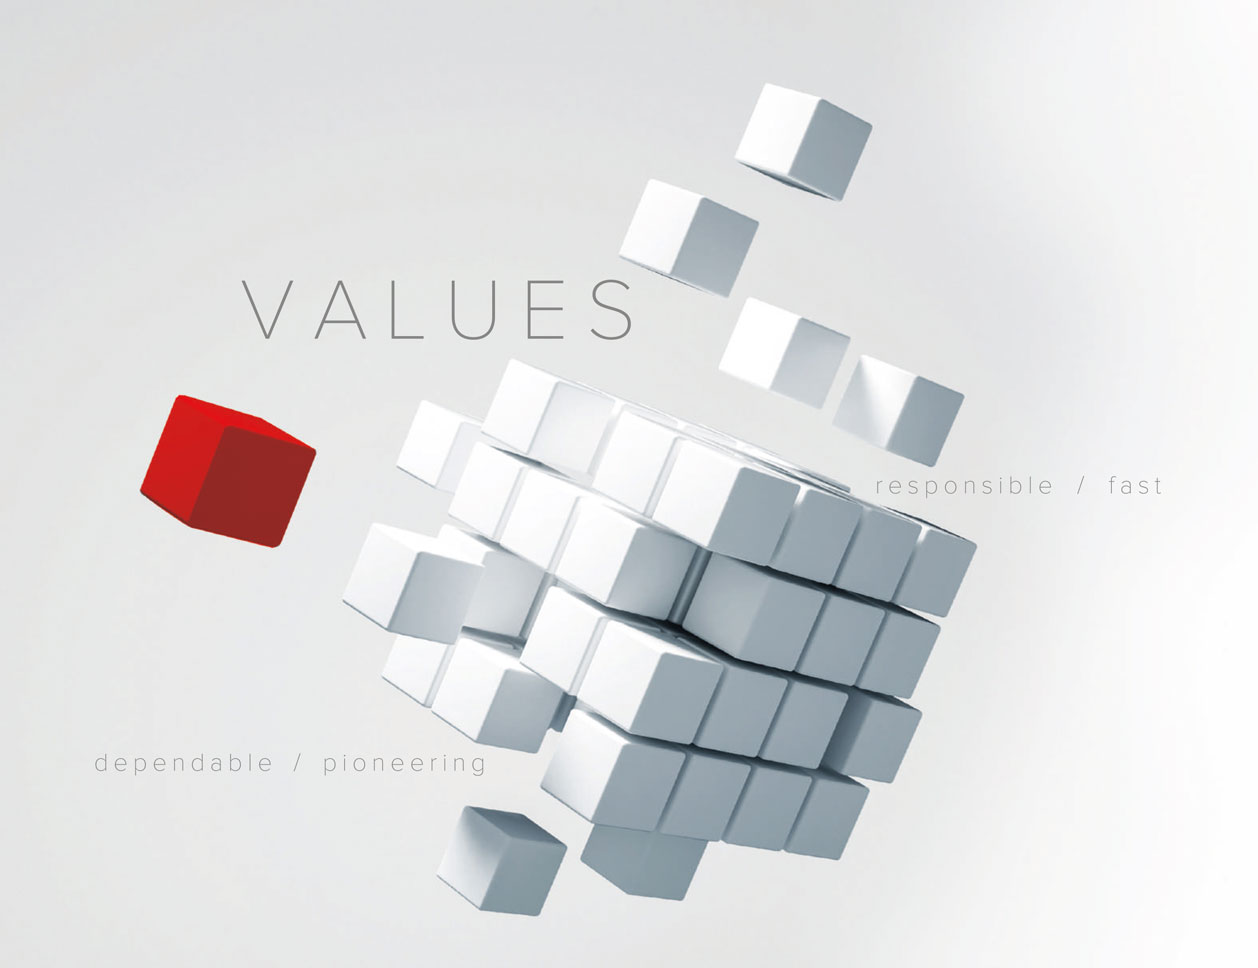 alapros-values